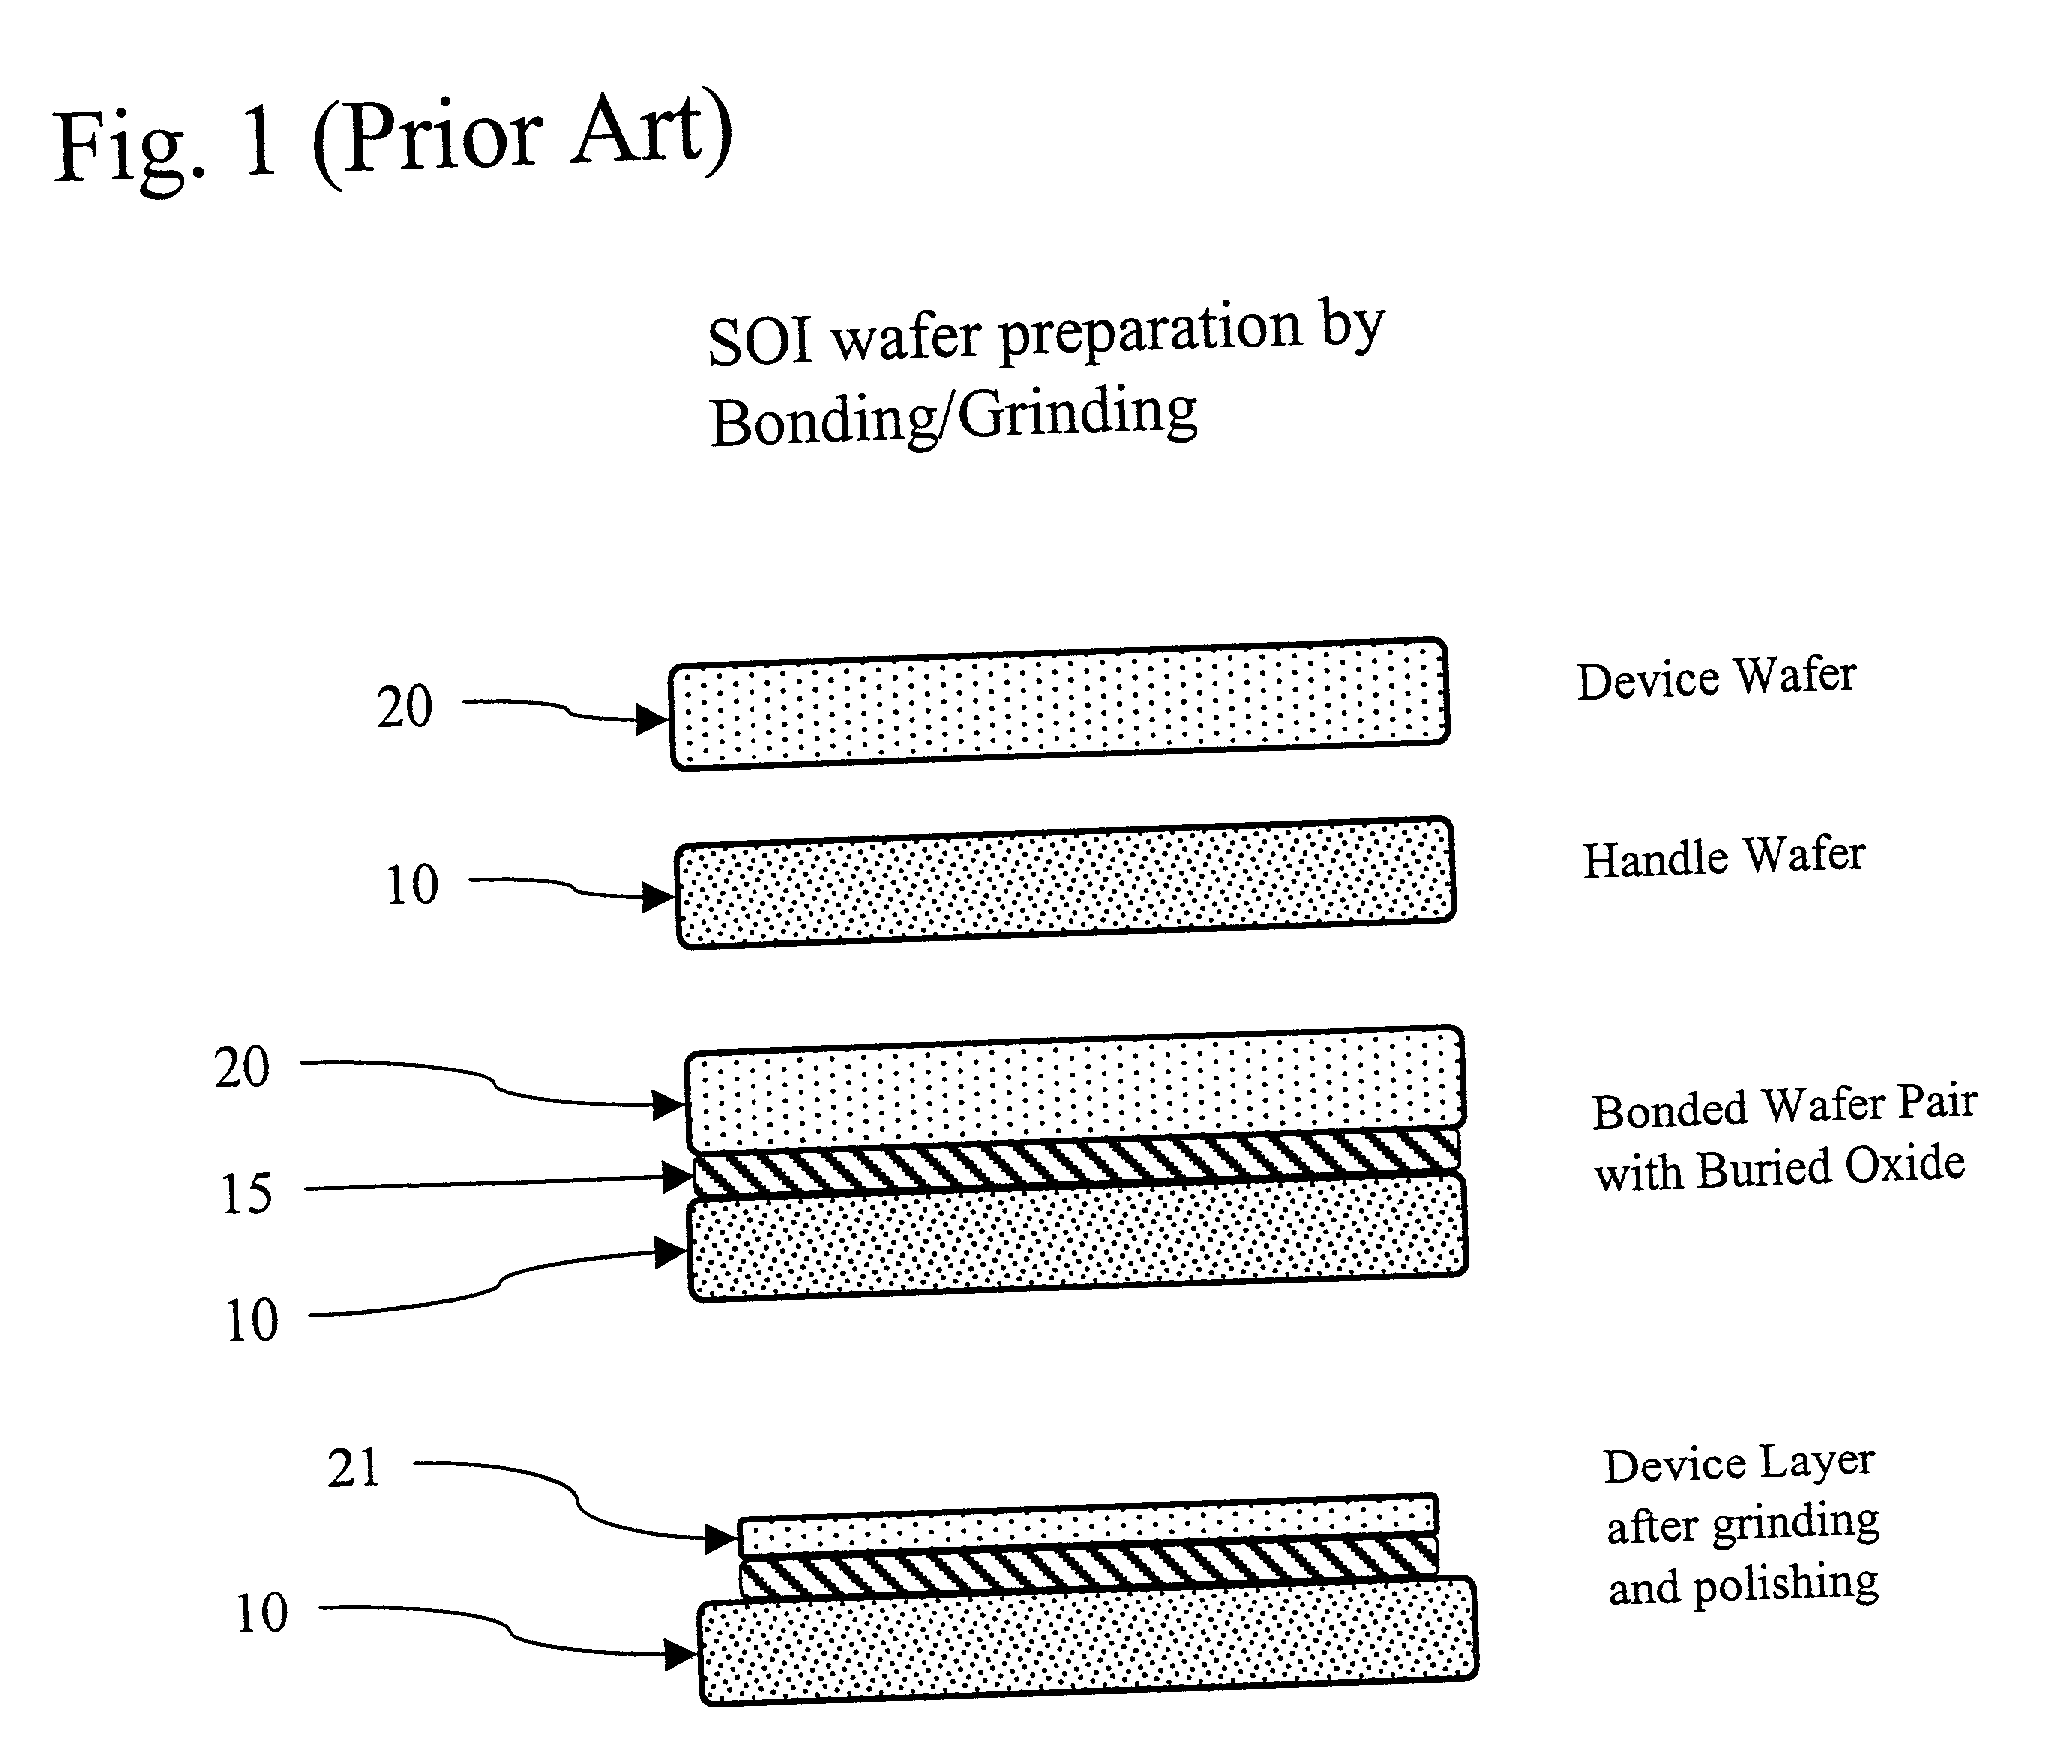 Methods for silicon-on-insulator (SOI) manufacturing with improved control and site thickness variations and improved bonding interface quality